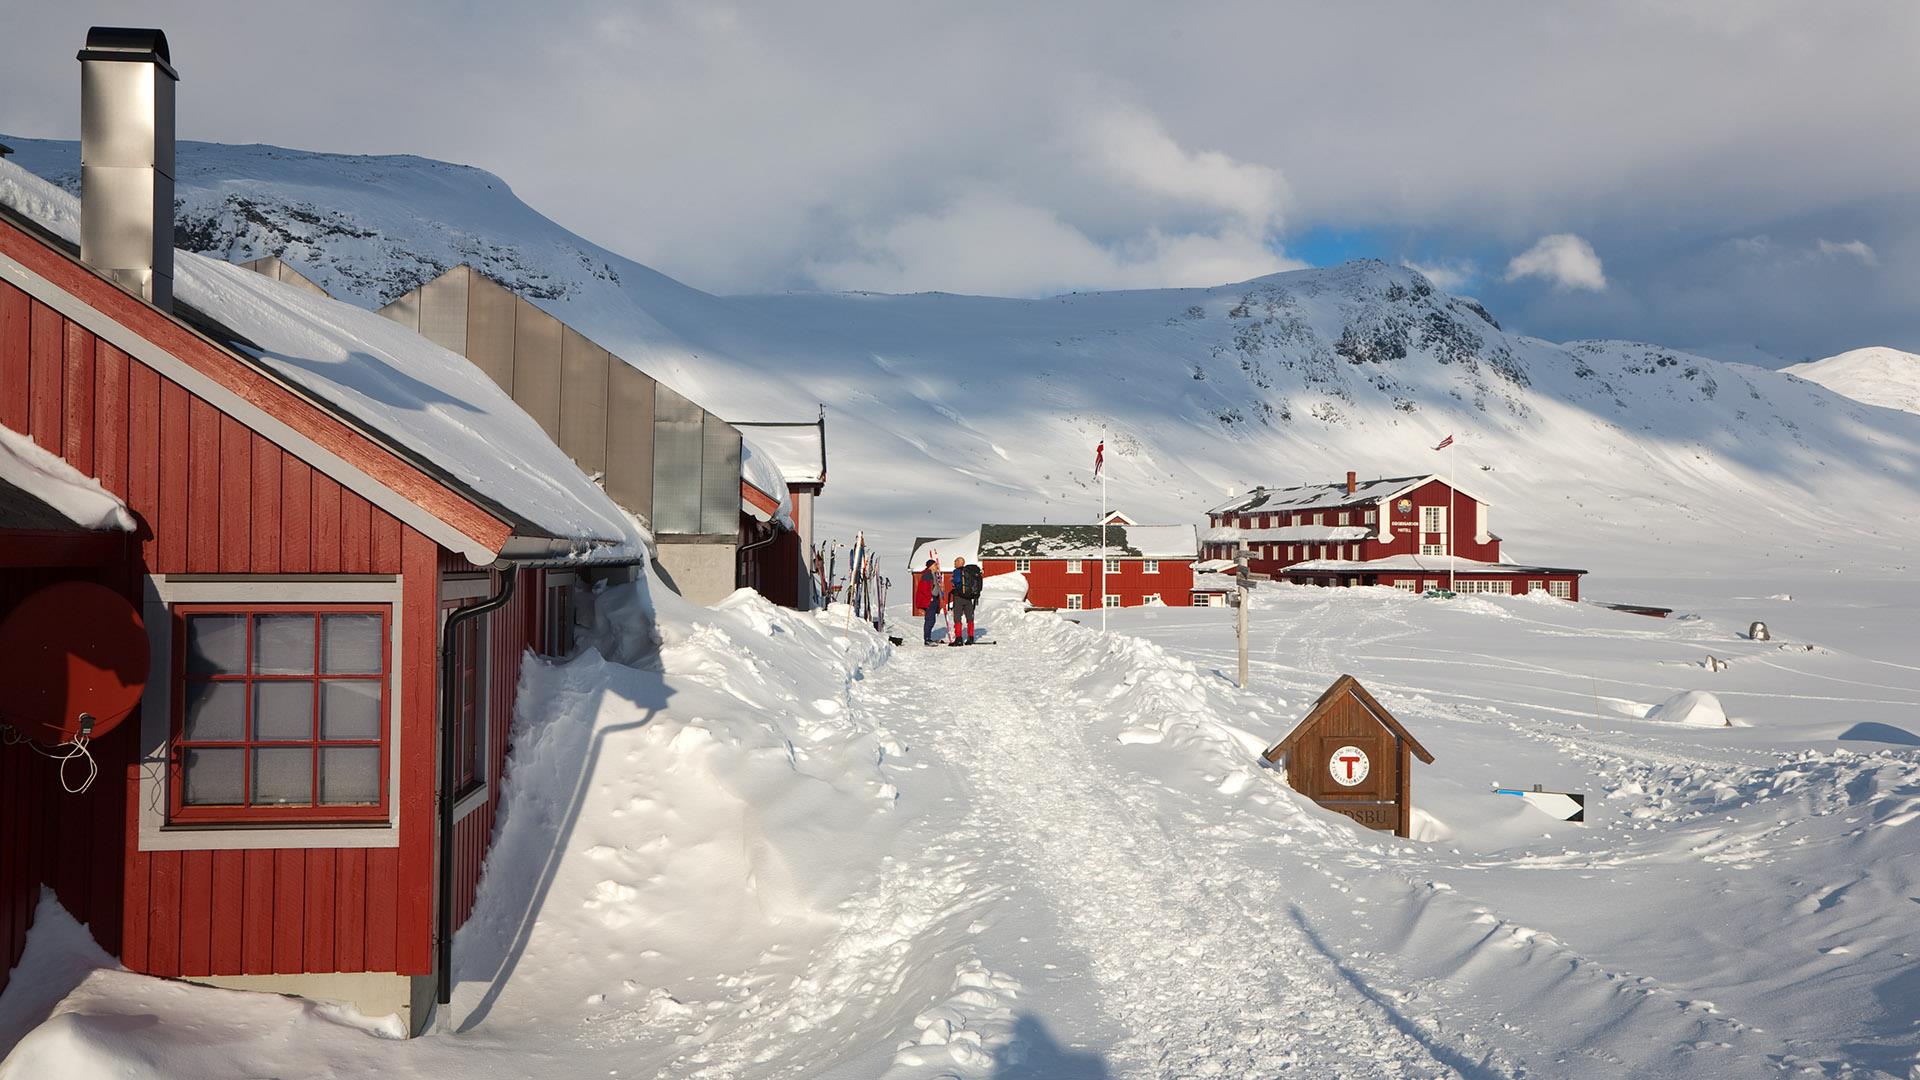 Red wooden buildings (one tourist cabin and one hotel) in the mountain at wintertime with lots of snow